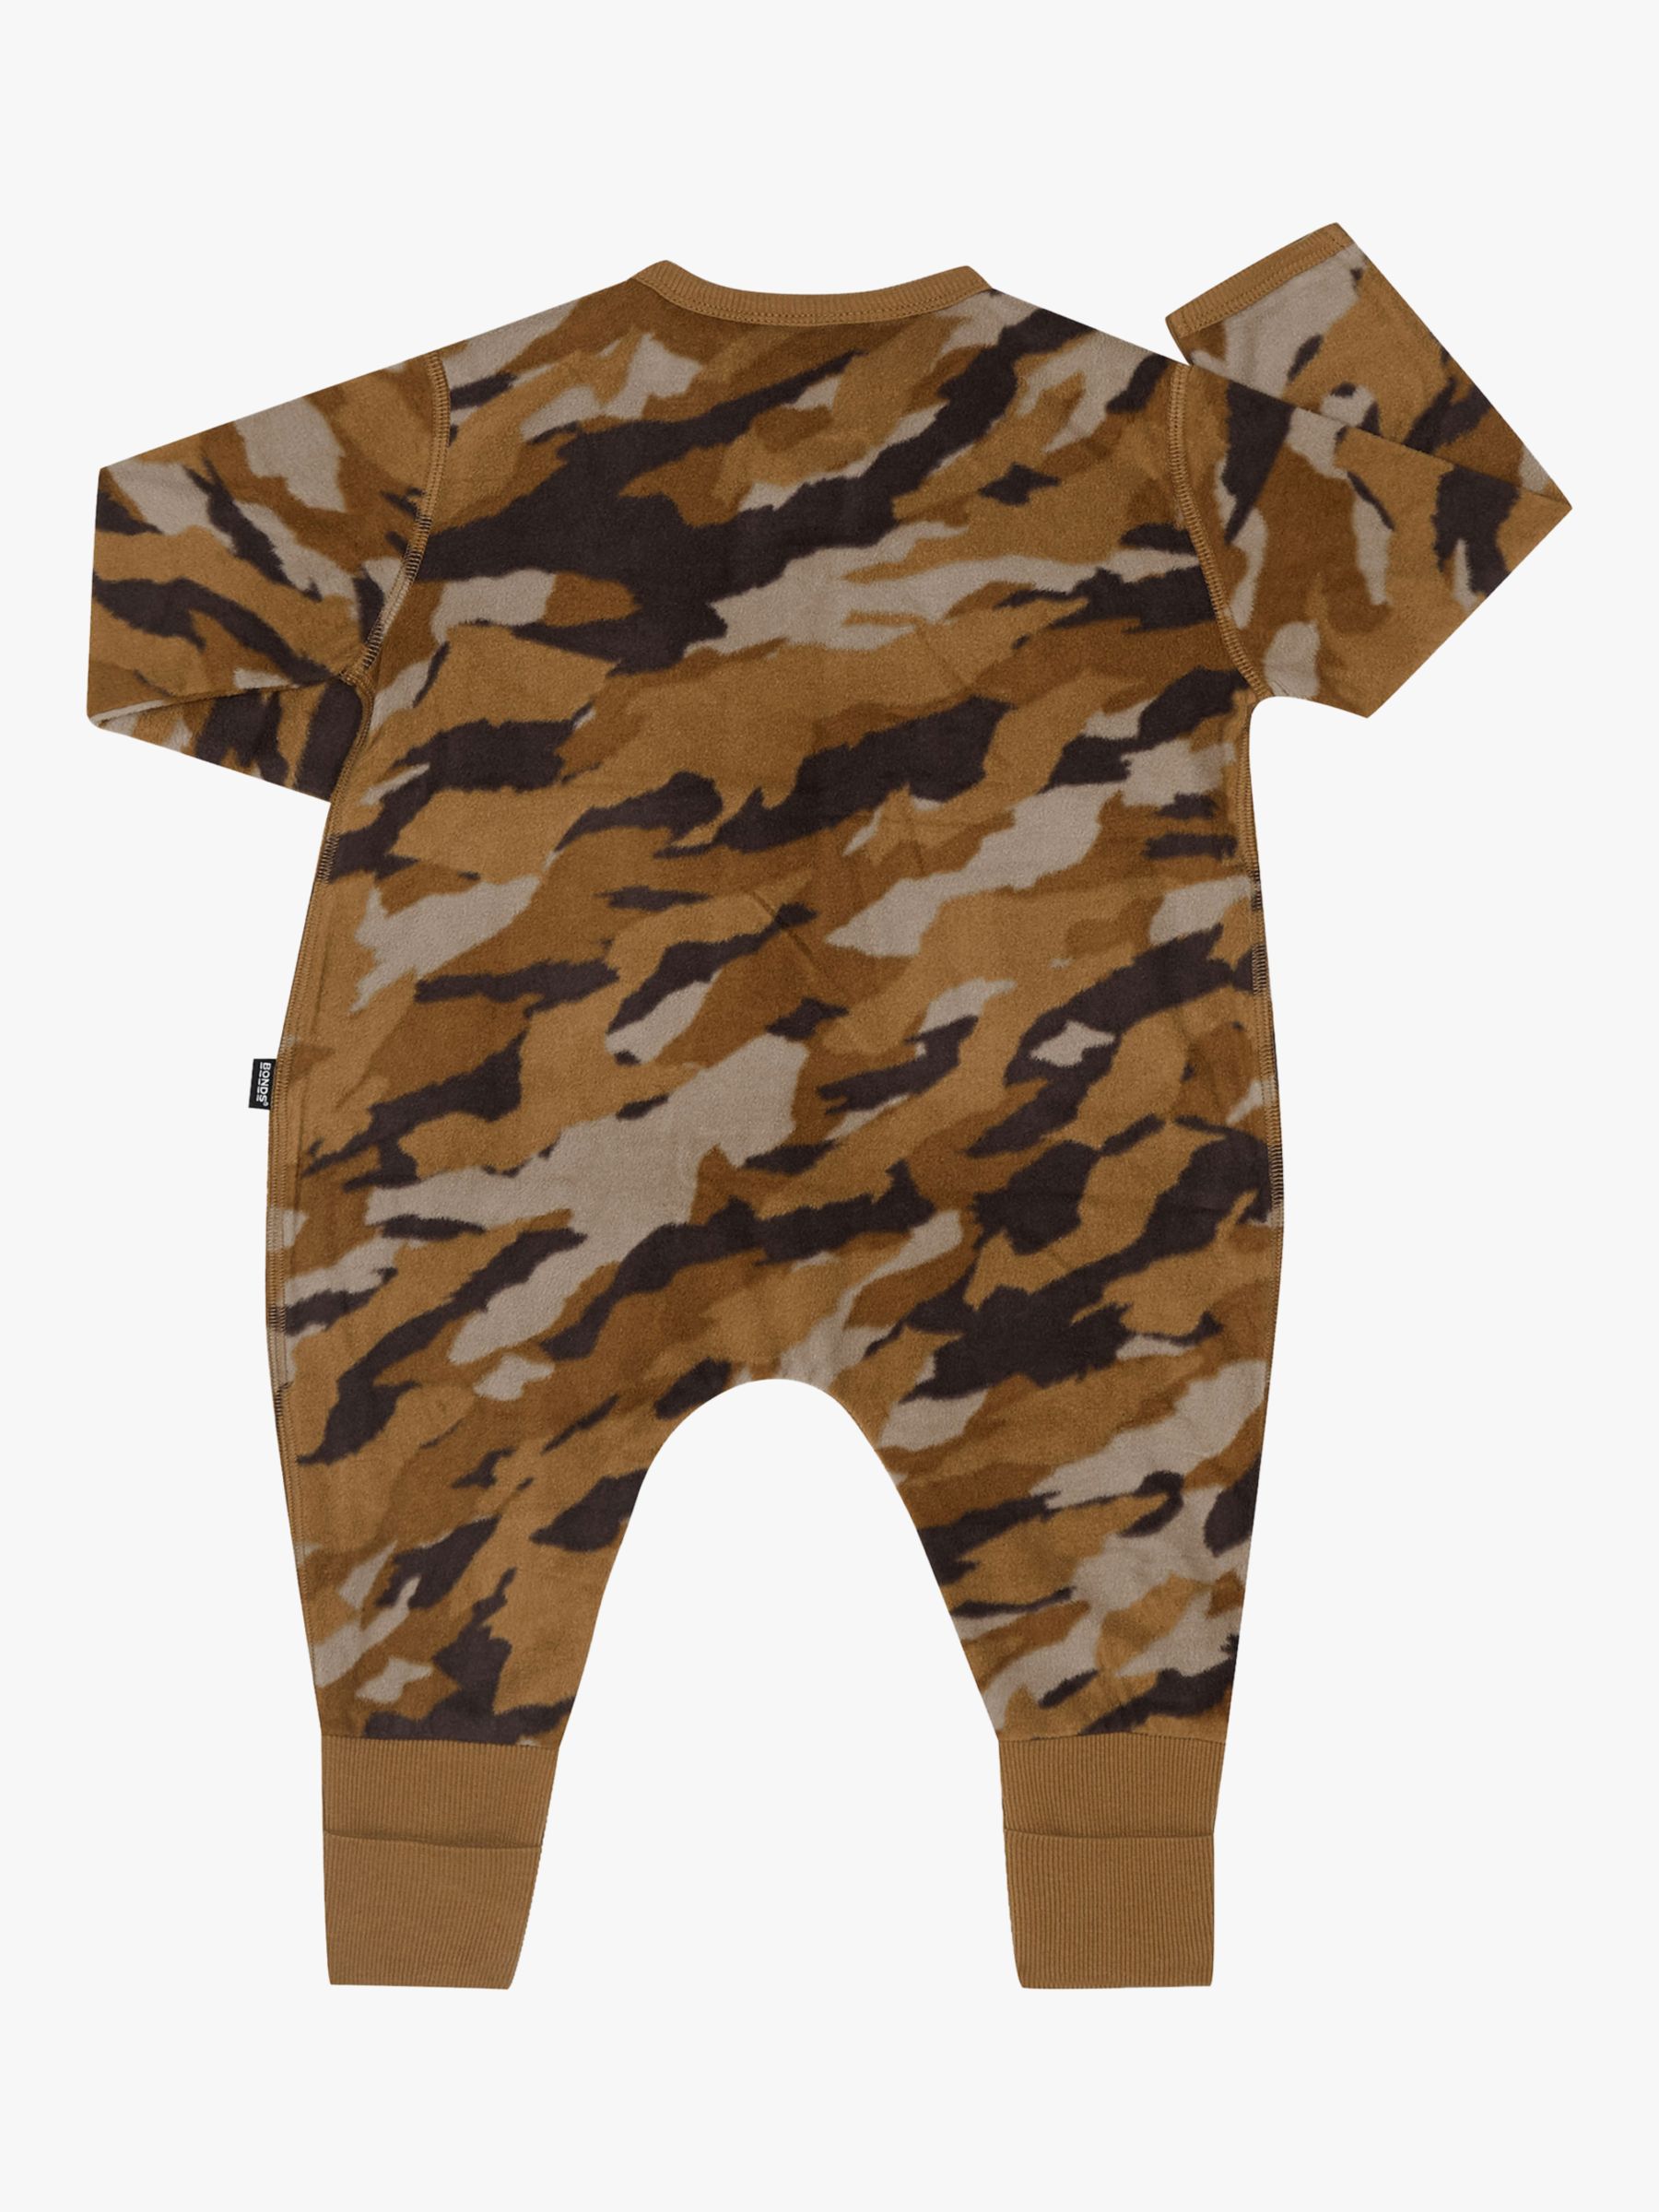 Ancient Inspiration Leads to Camo Sleeping Bag Suit